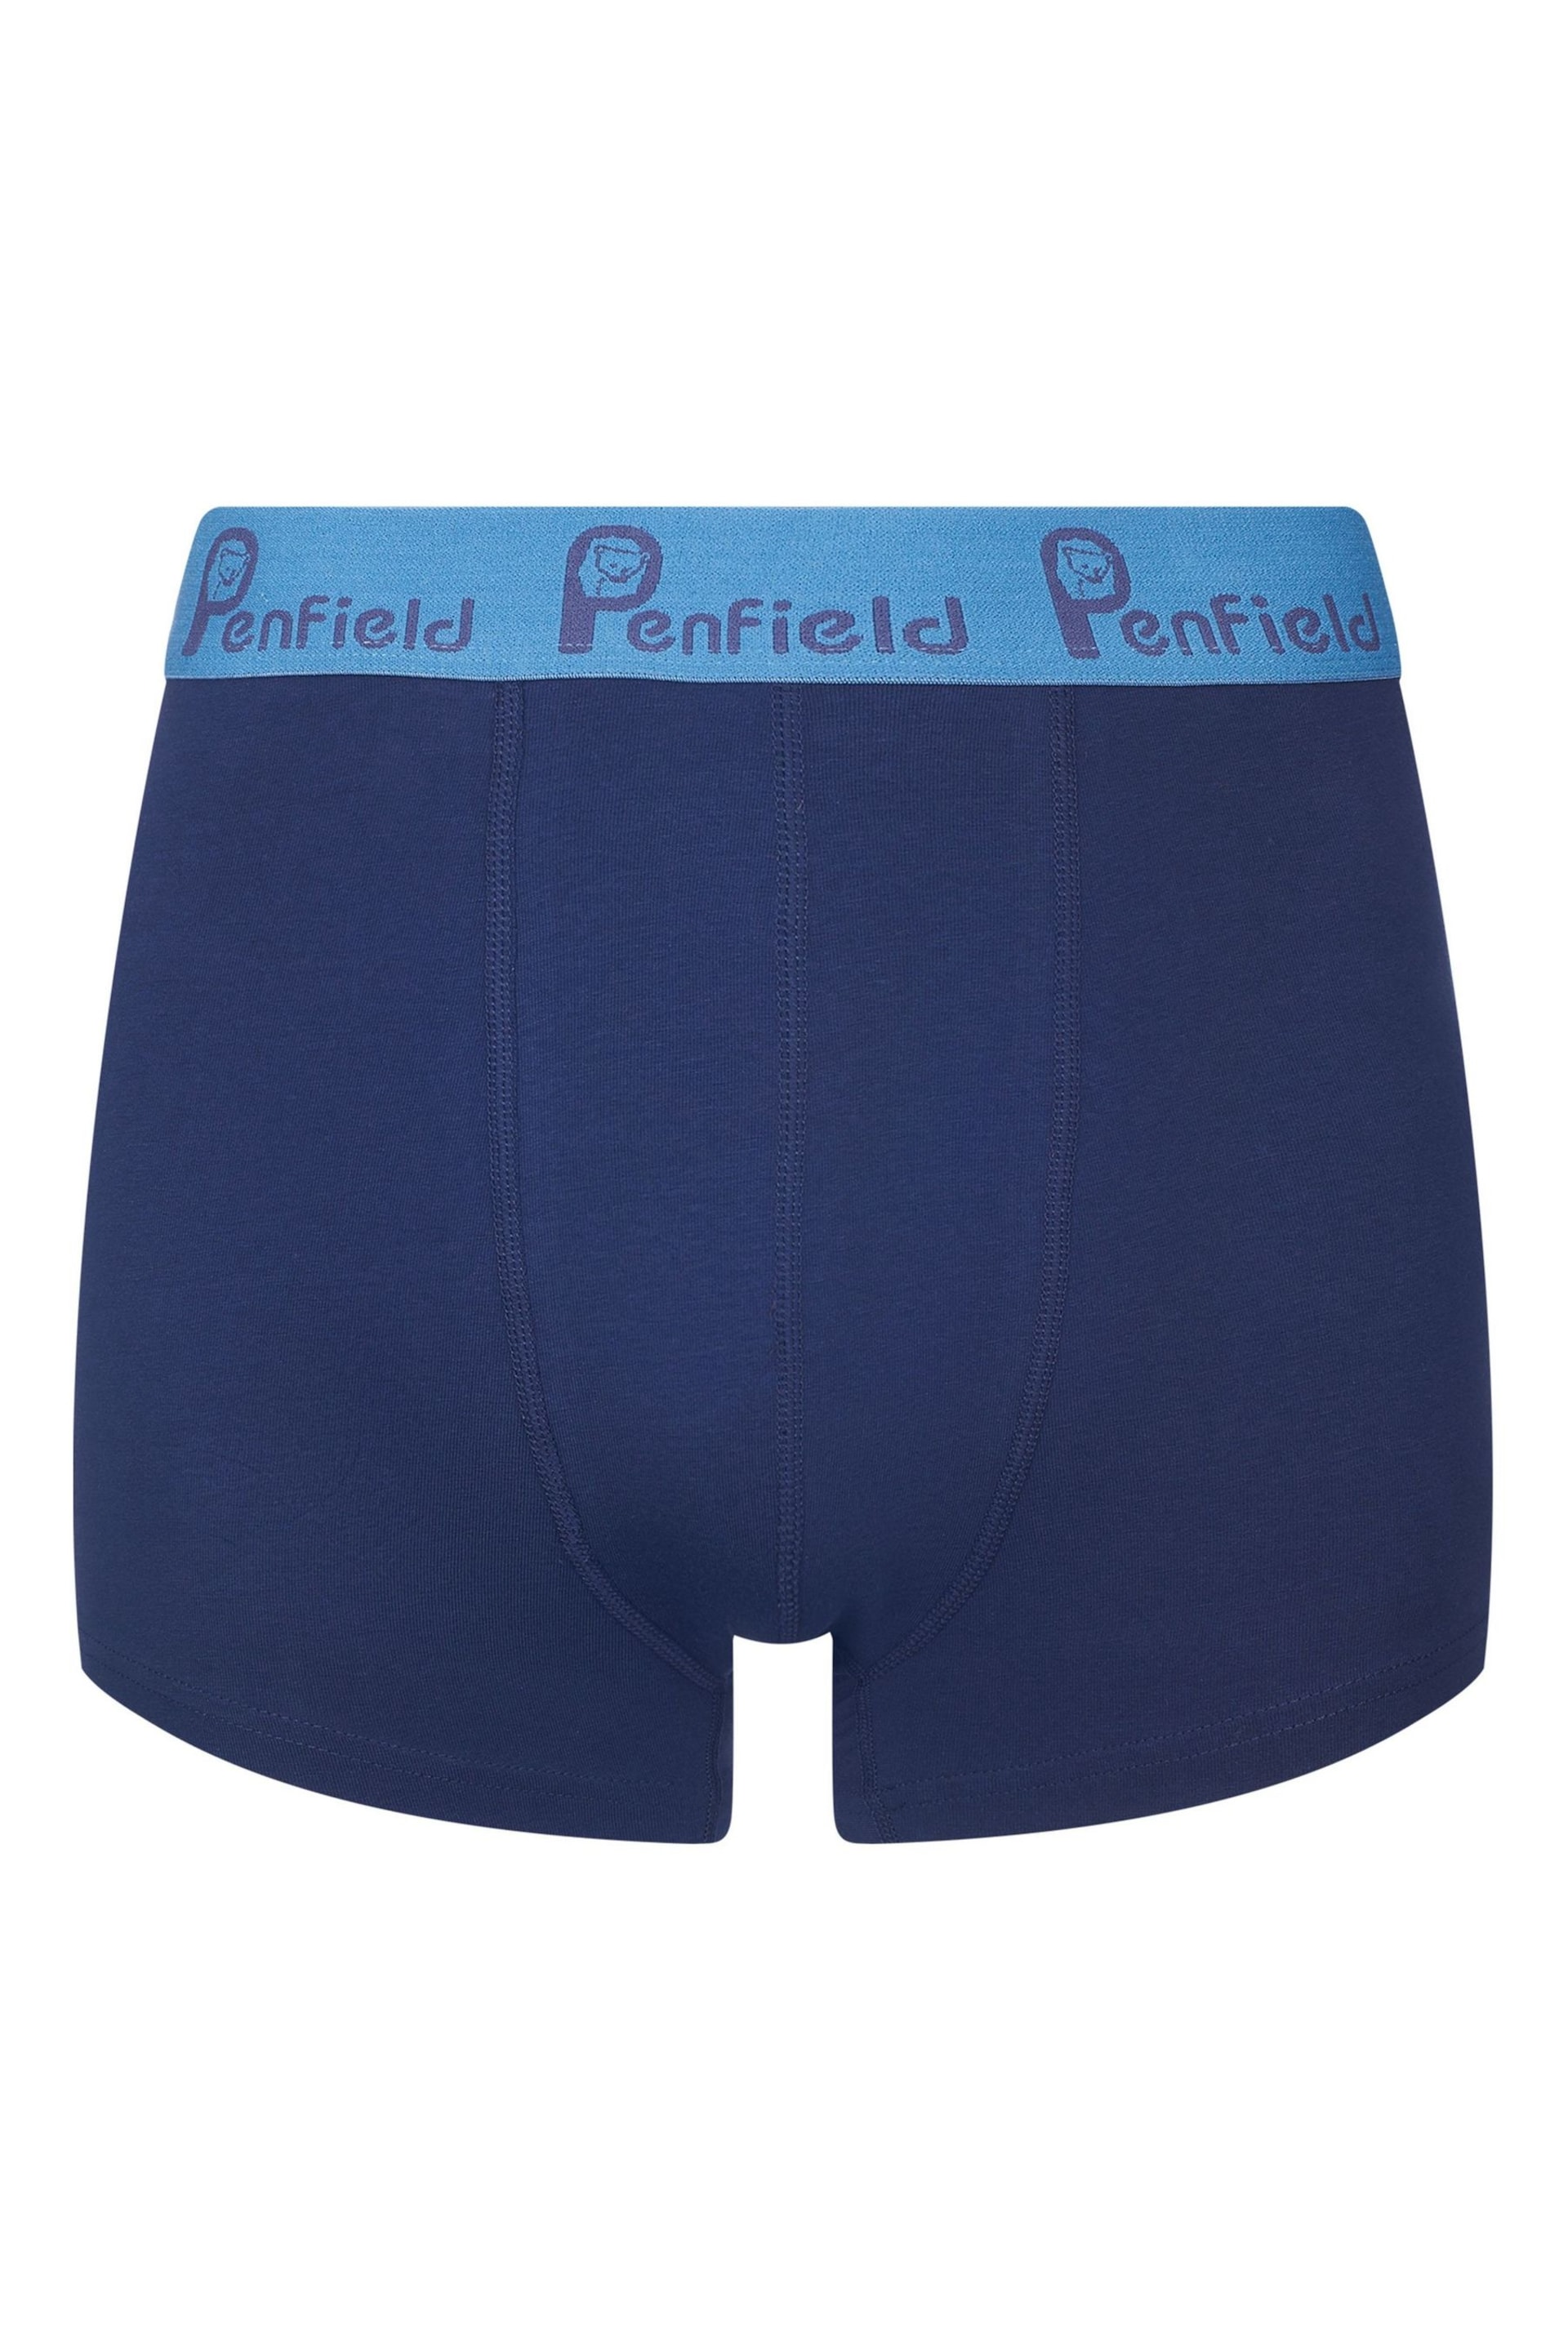 Penfield Blue Penfield Script Boxers 3 Pack - Image 4 of 5